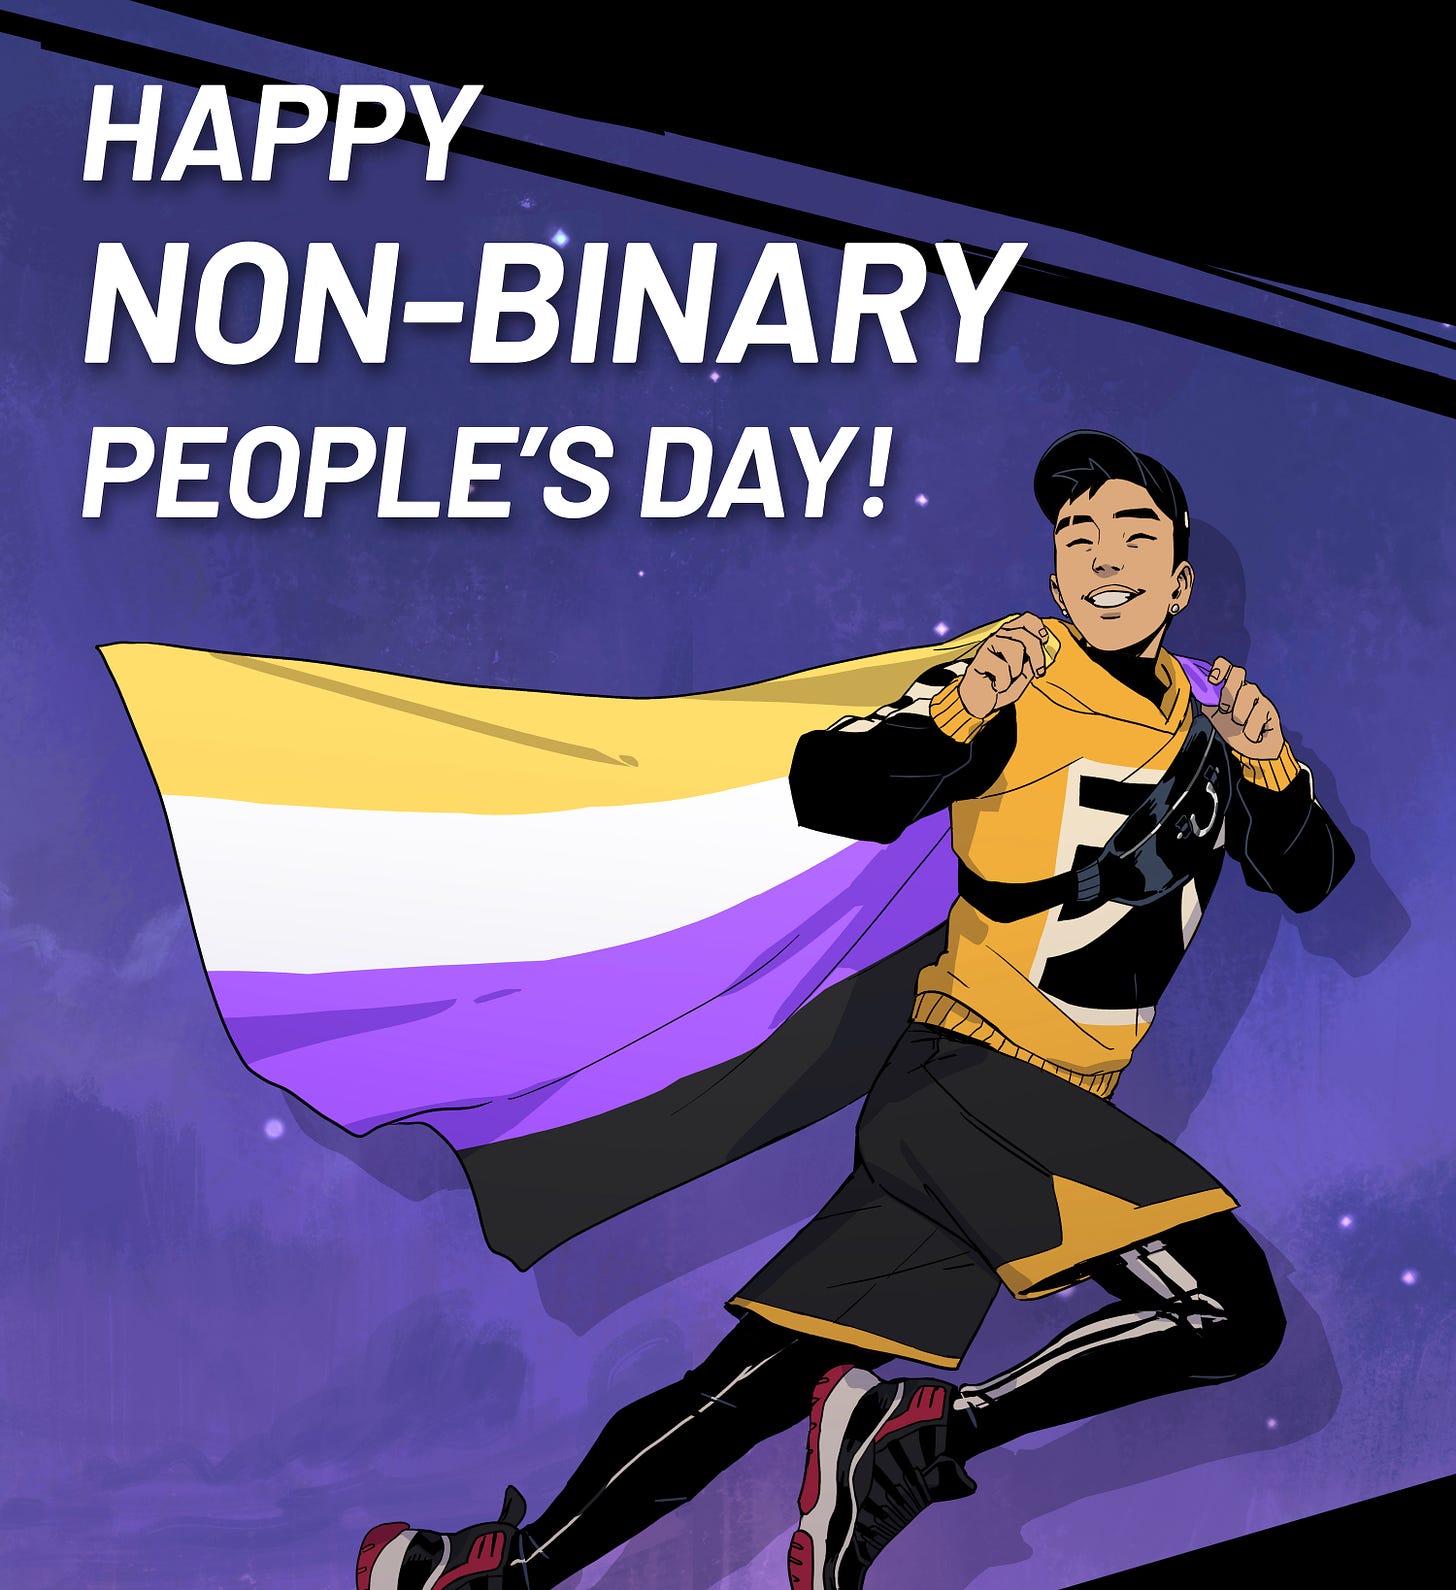 Hermes mid-leap with a huge grin, draped in a non-binary pride flag, with the text "Happy Non-Binary People's Day!"